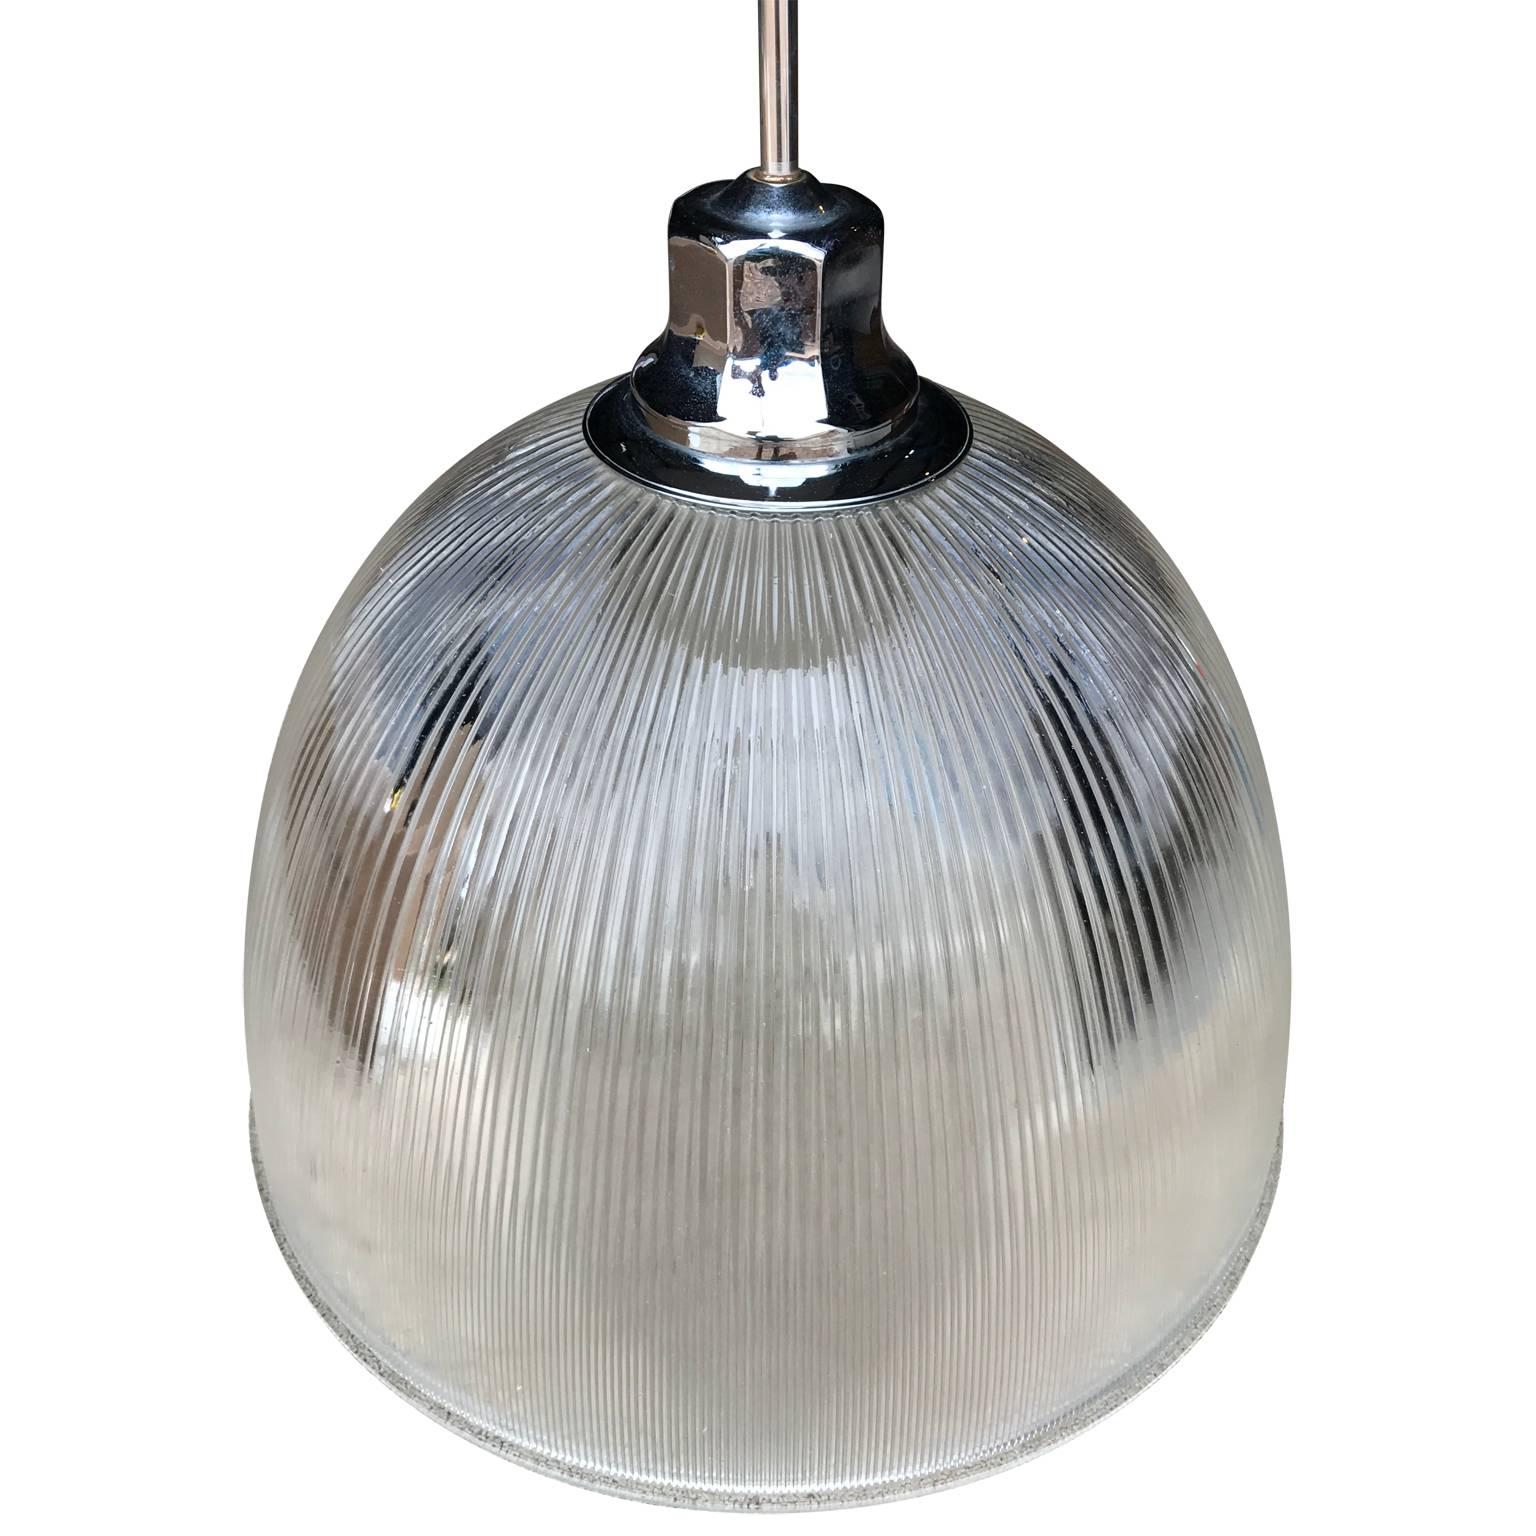 Large Industrial glass pendant with thick chrome hardware. 
The glass dome is signed HOLOPHONE ENDURAL NO 6650, pressed into the glass edge.
The diameter of this light is 25.5 inches, potentially the largest size ever made by Holophone. Height of